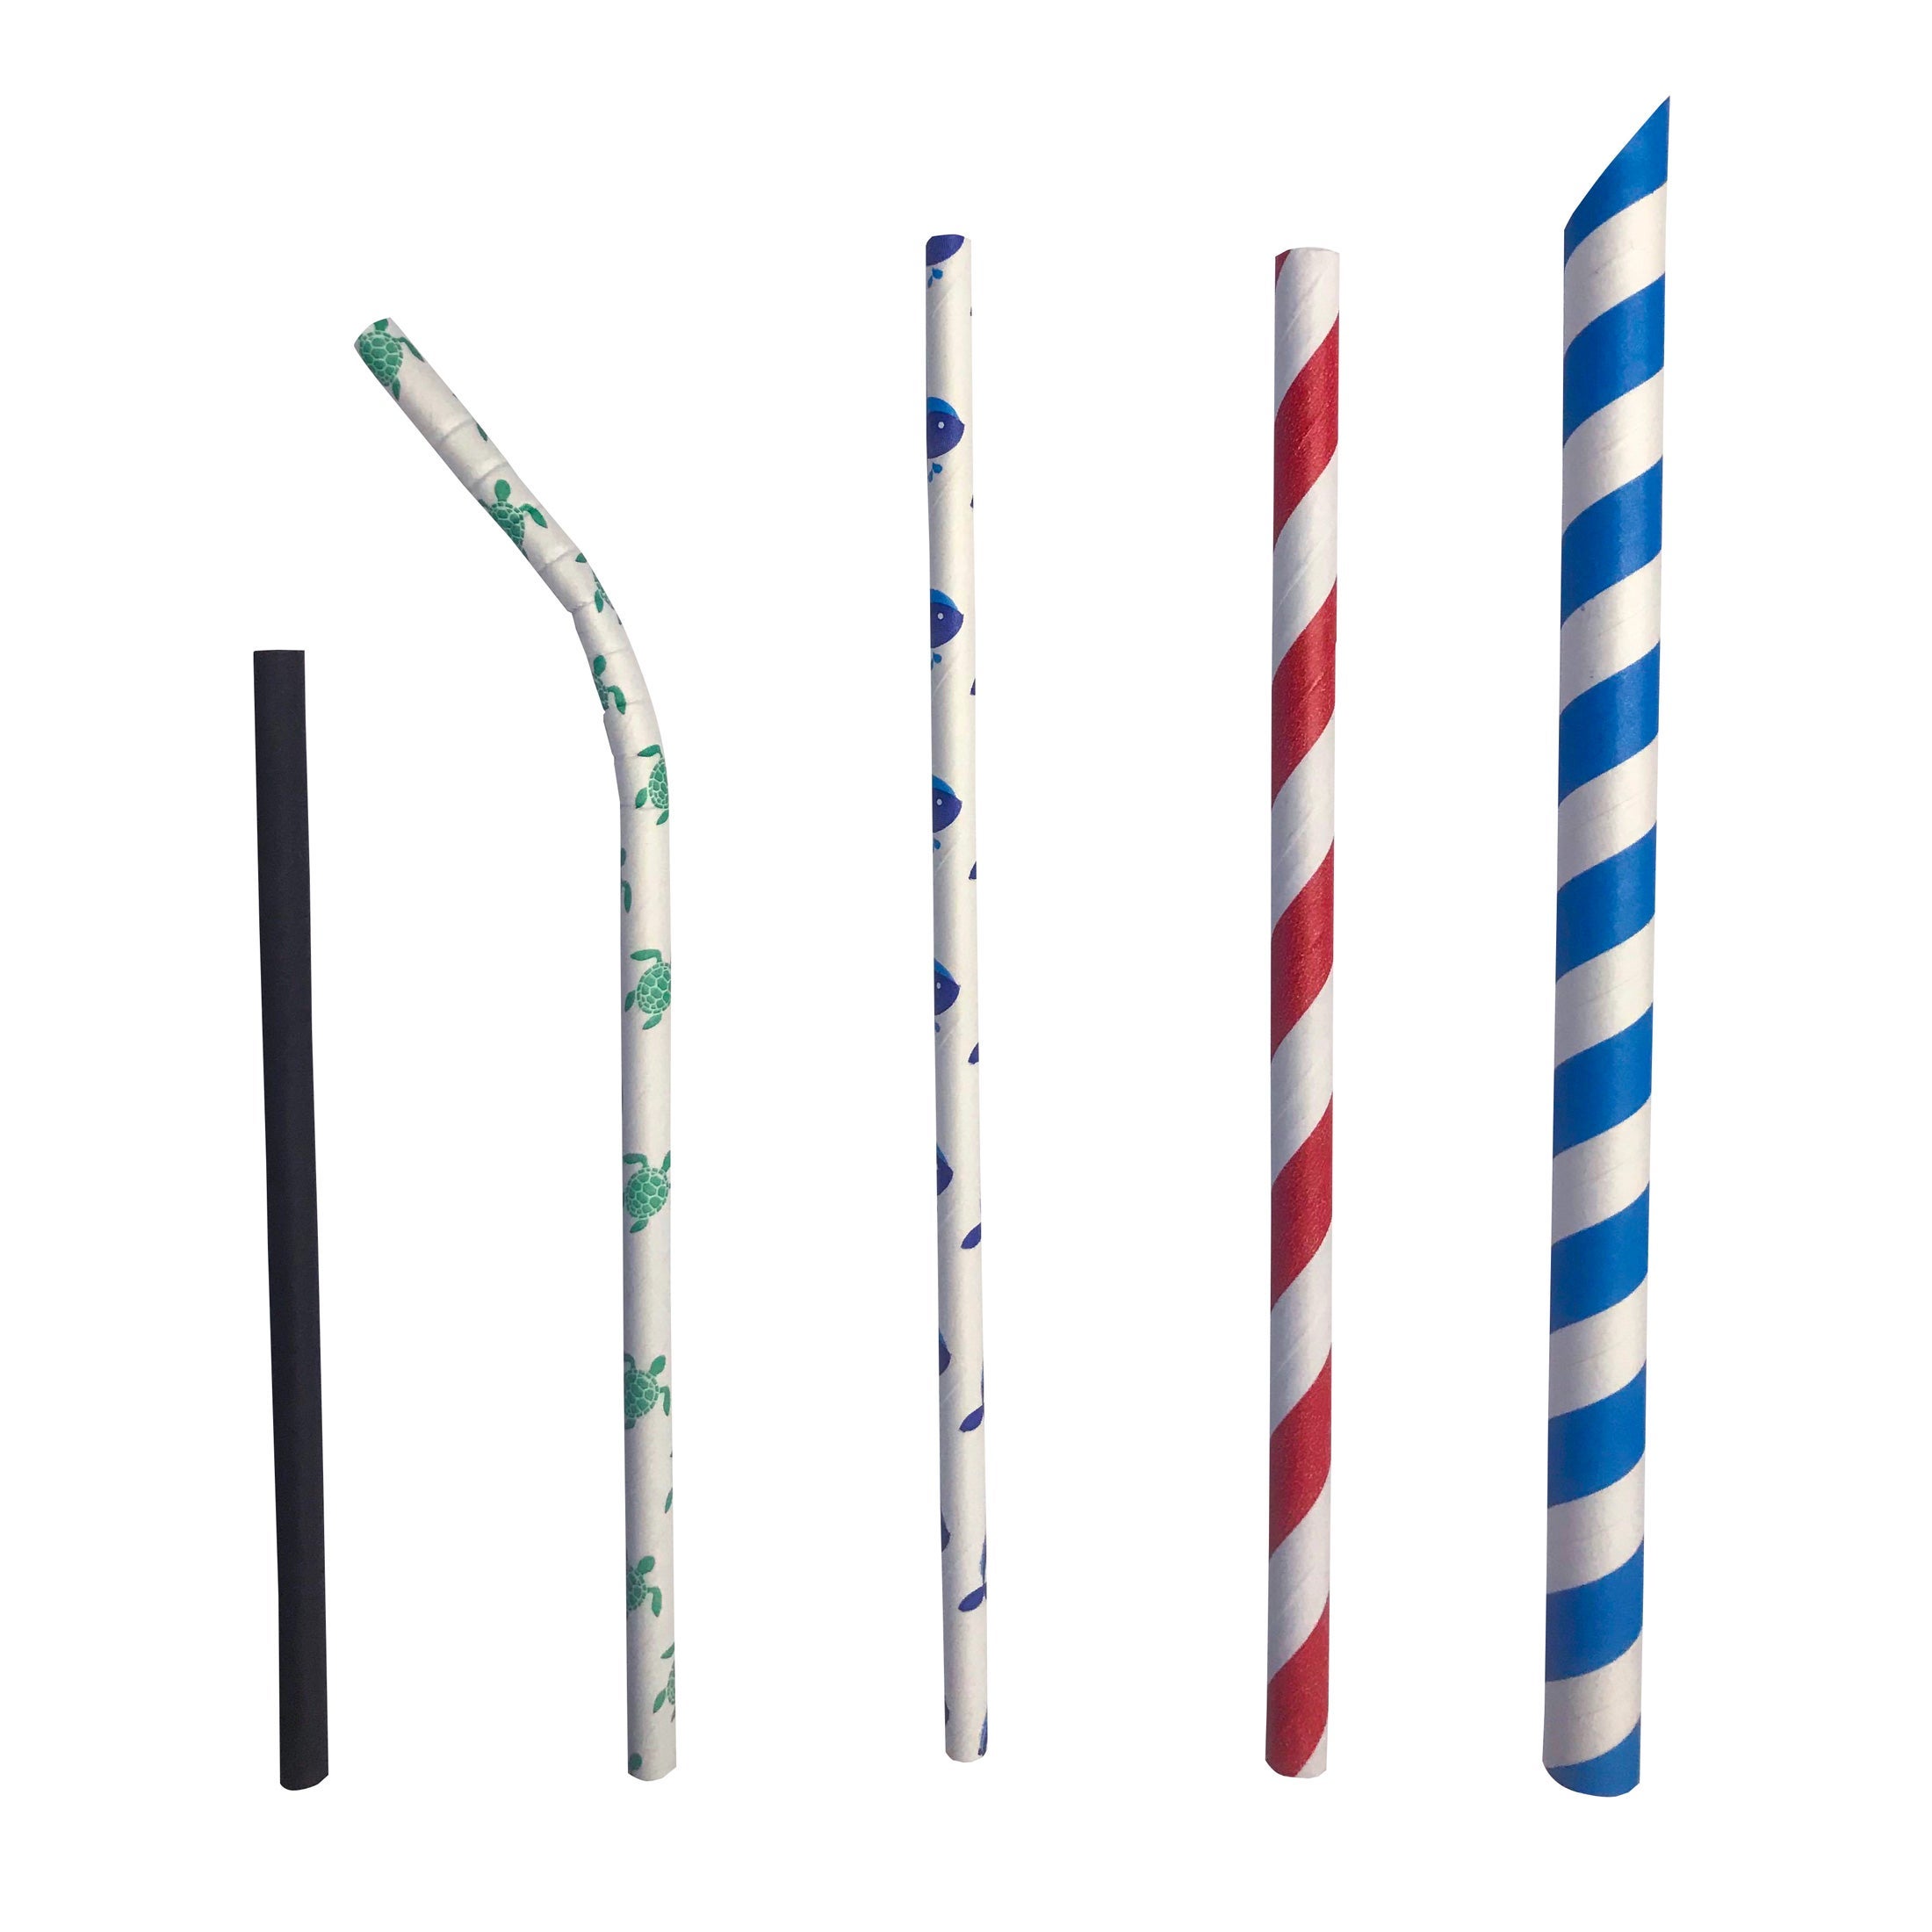 Paper straws lined up.